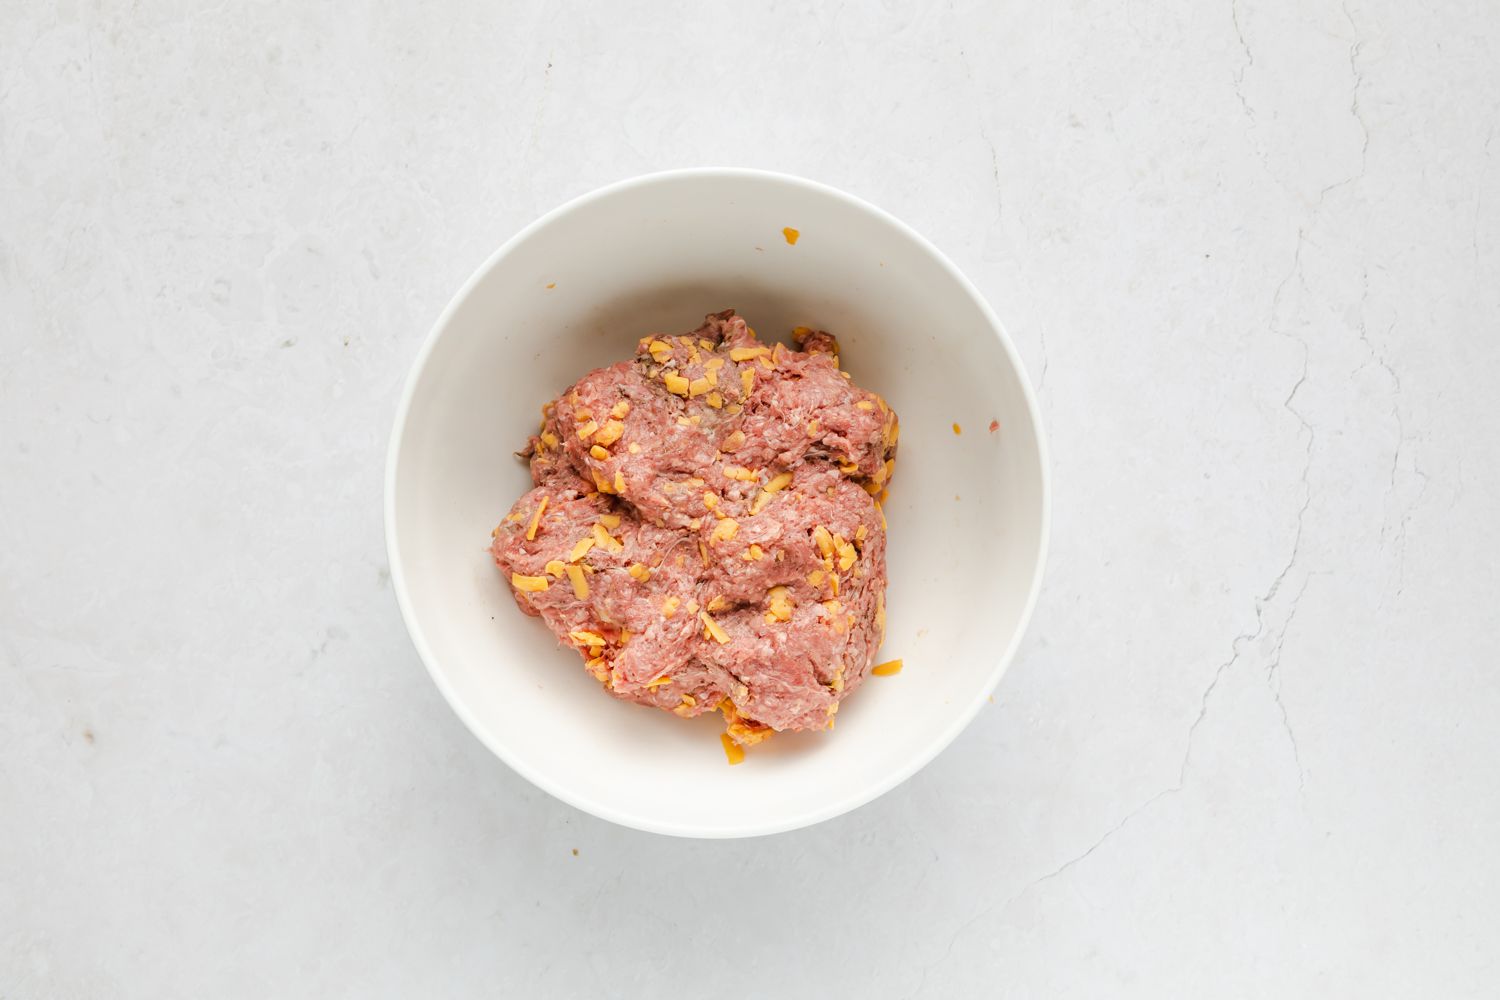 burger meat mixed with some shredded cheese in a bowl 